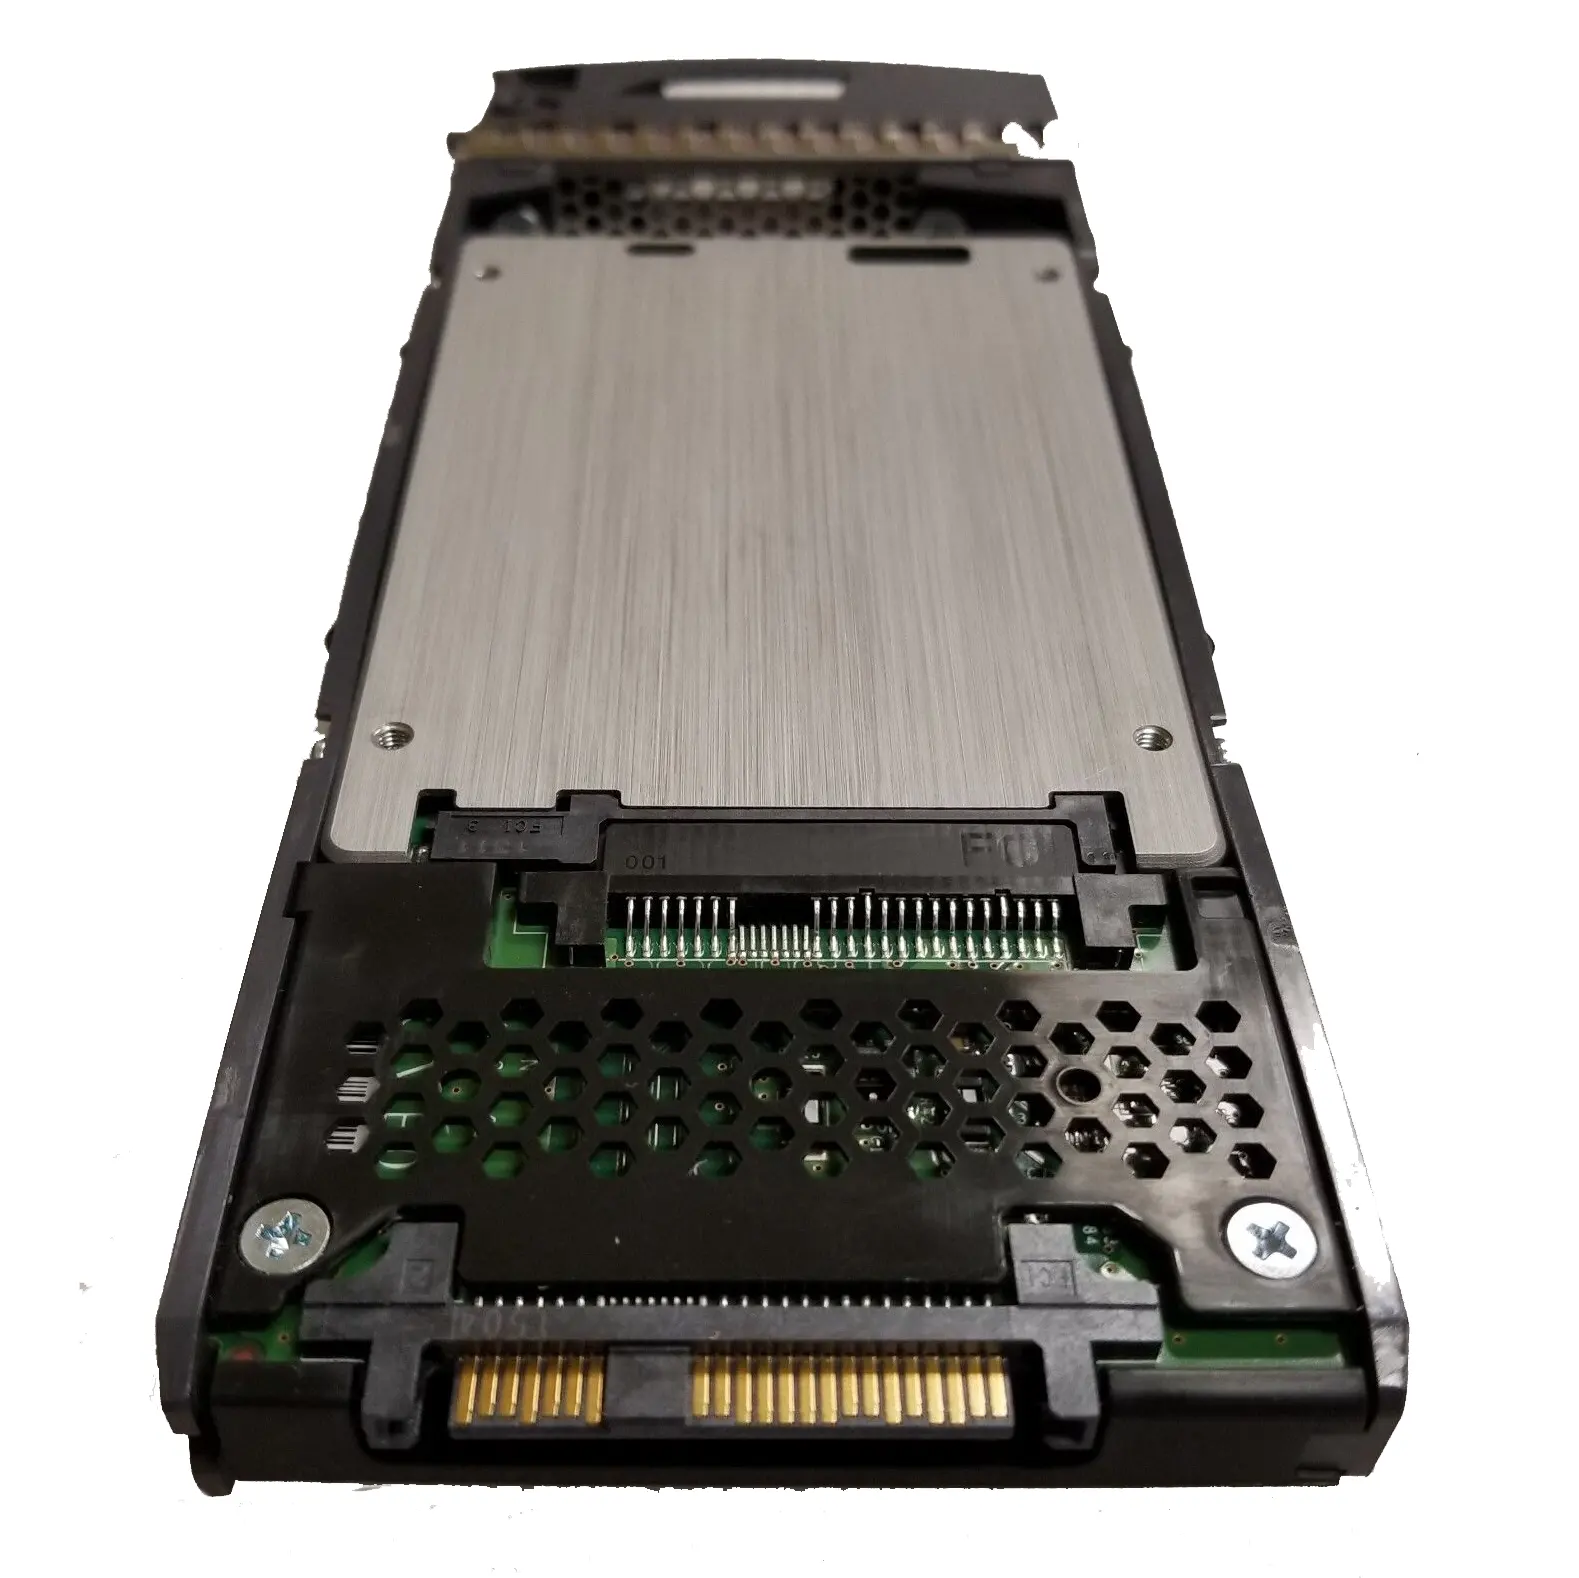 X447A-R6 NetApp 800GB SAS 2.5in 12GB/s SSD Solid State Drive for Server